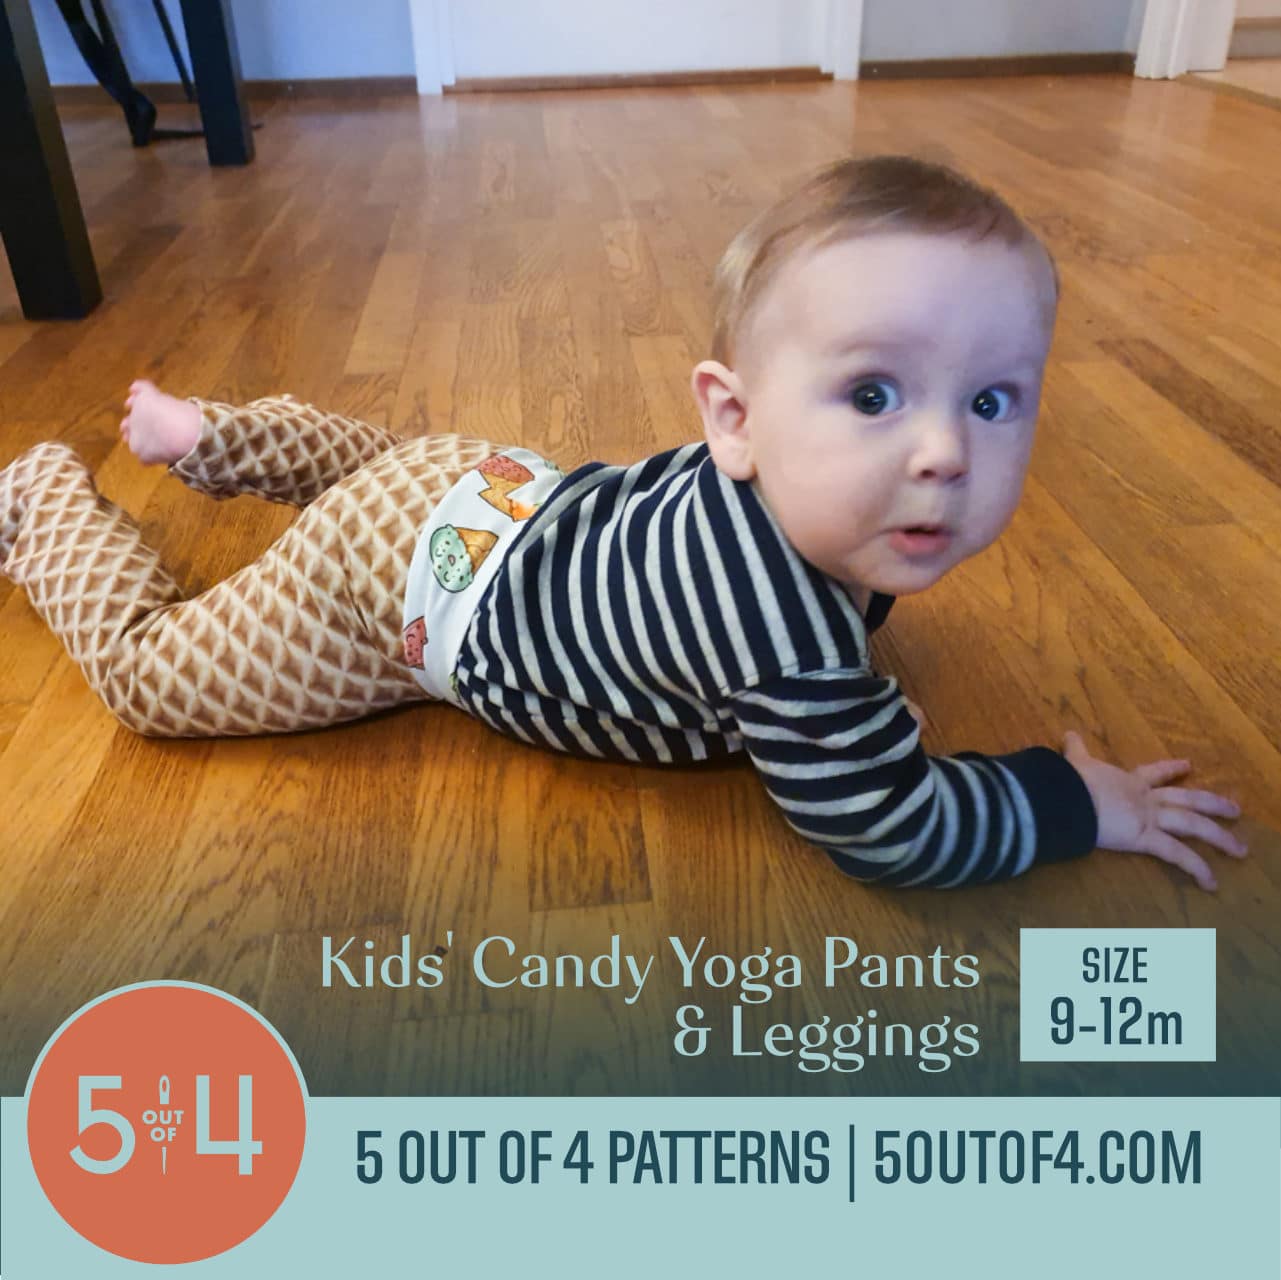 Candy Yoga Pants and Leggings - 5 out of 4 Patterns